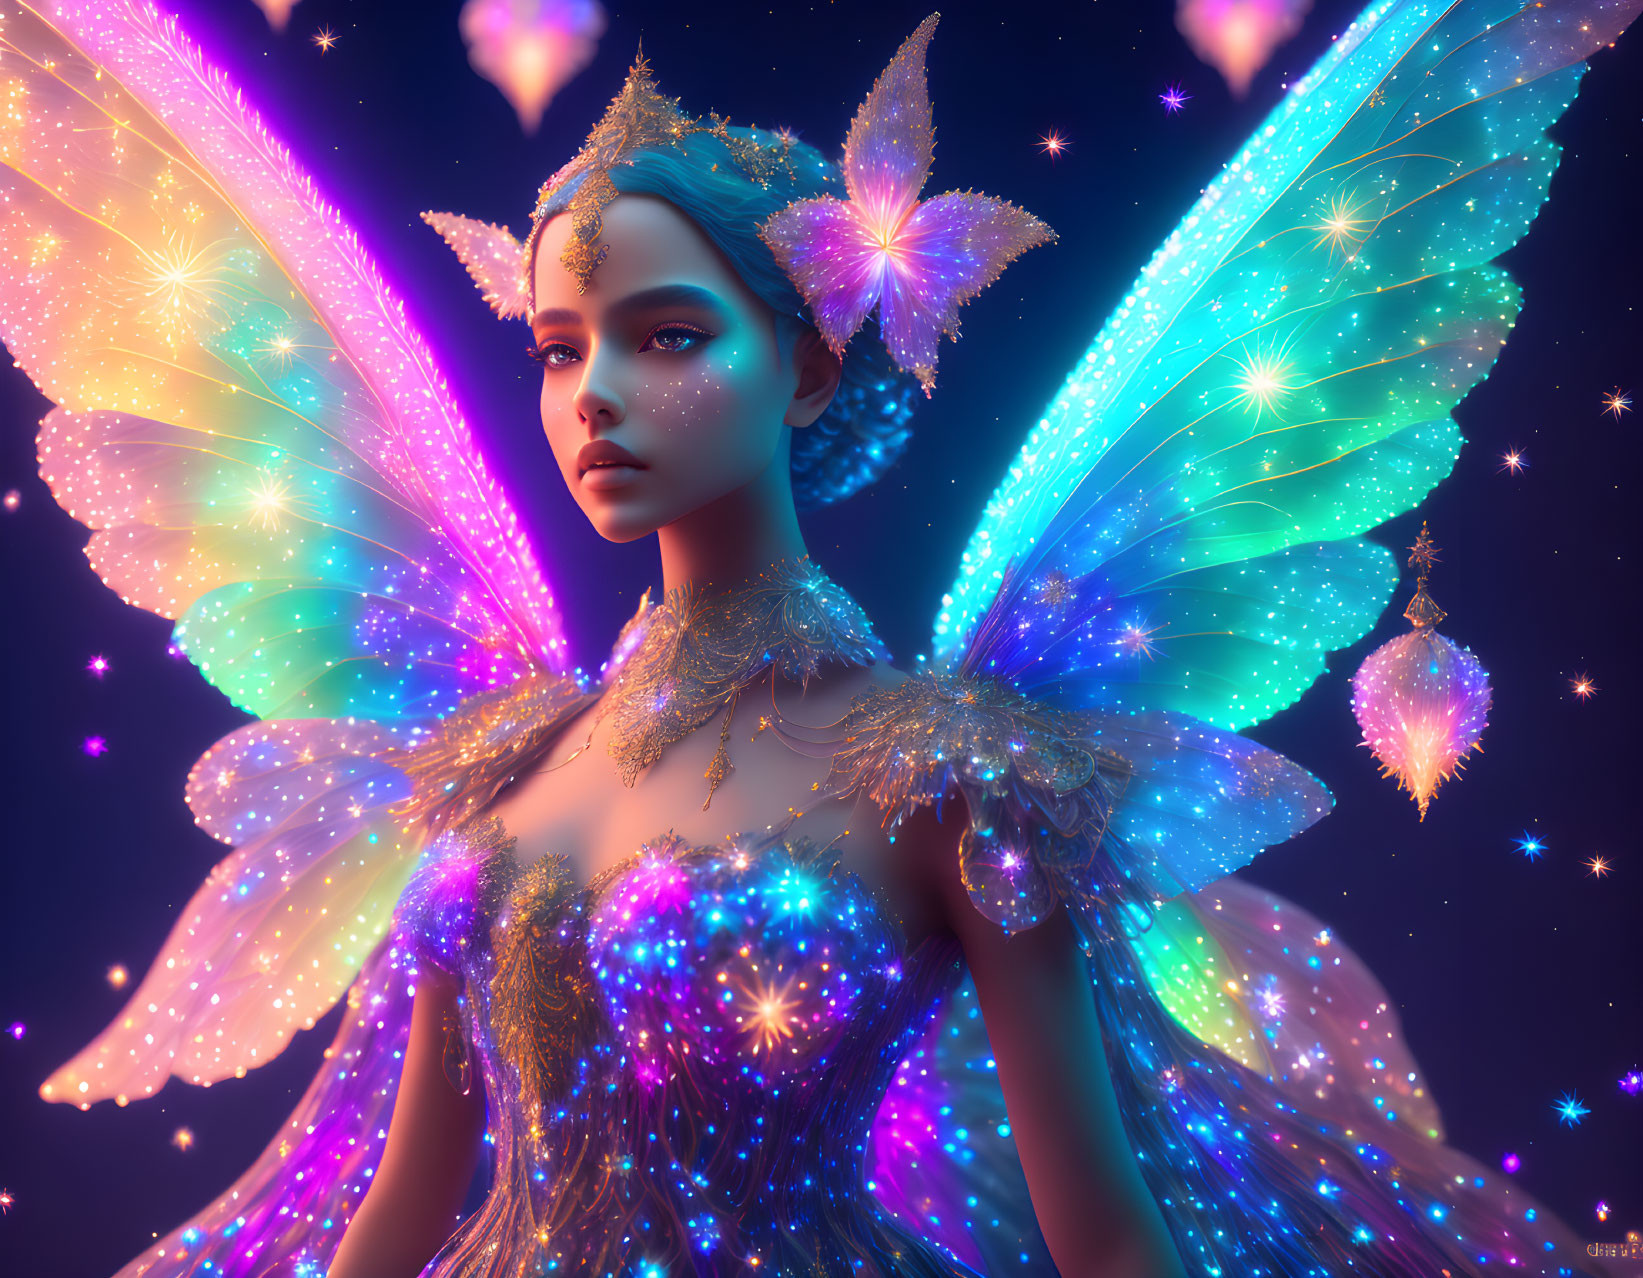 Colorful Fairy with Multicolored Wings in Jeweled Outfit on Starry Night